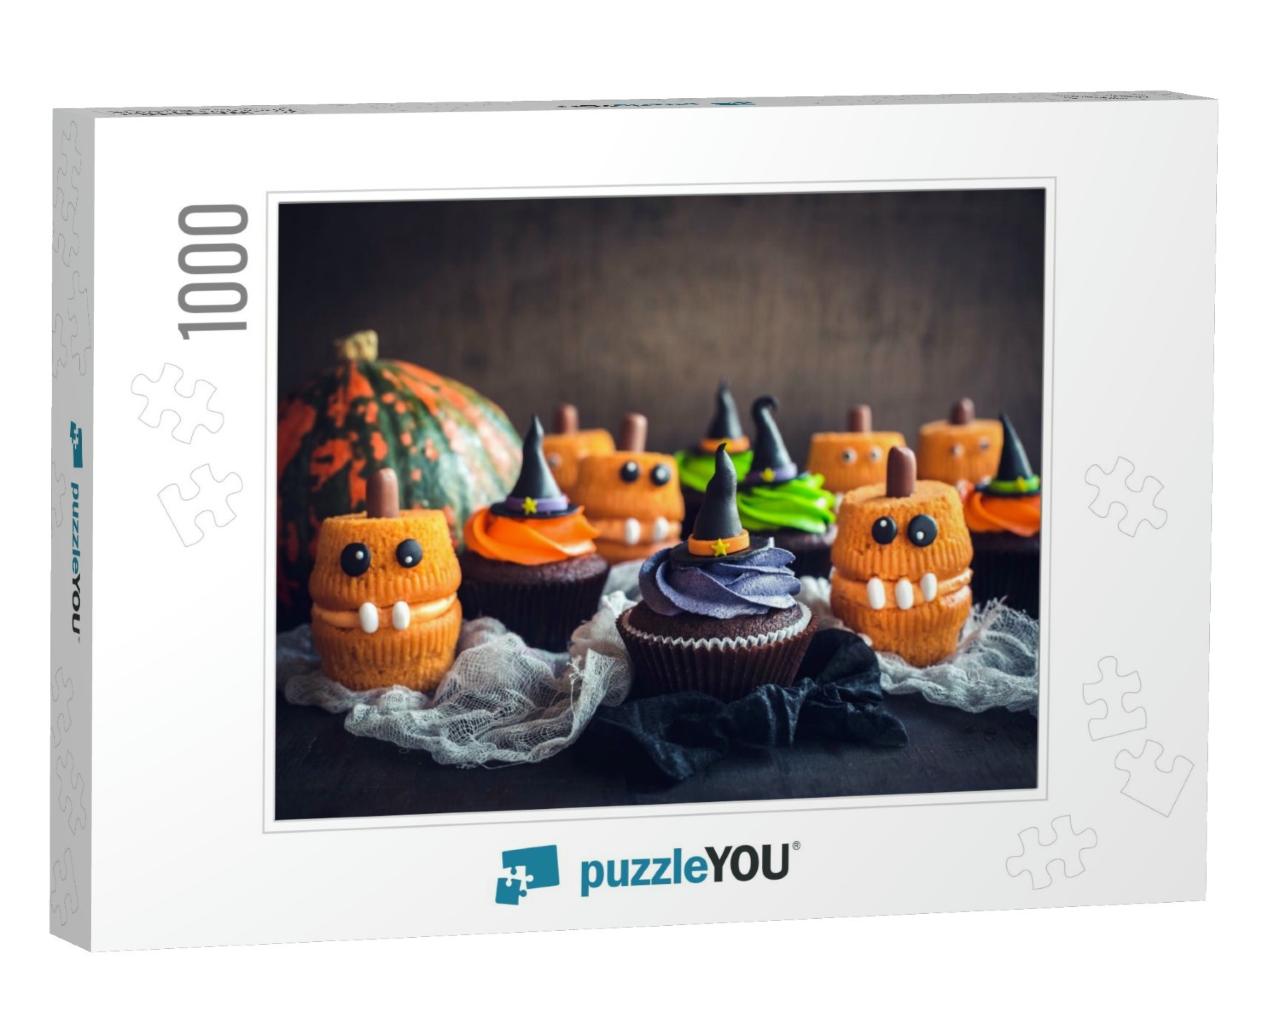 Scary Halloween Cup Cakes on the Table, Selective Focus... Jigsaw Puzzle with 1000 pieces